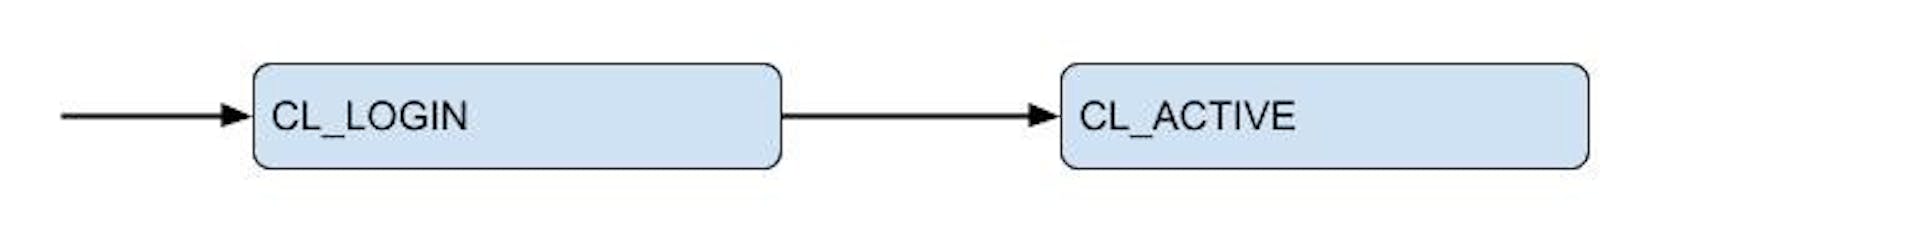 featured image - Understanding Postgres connection pooling with PgBouncer